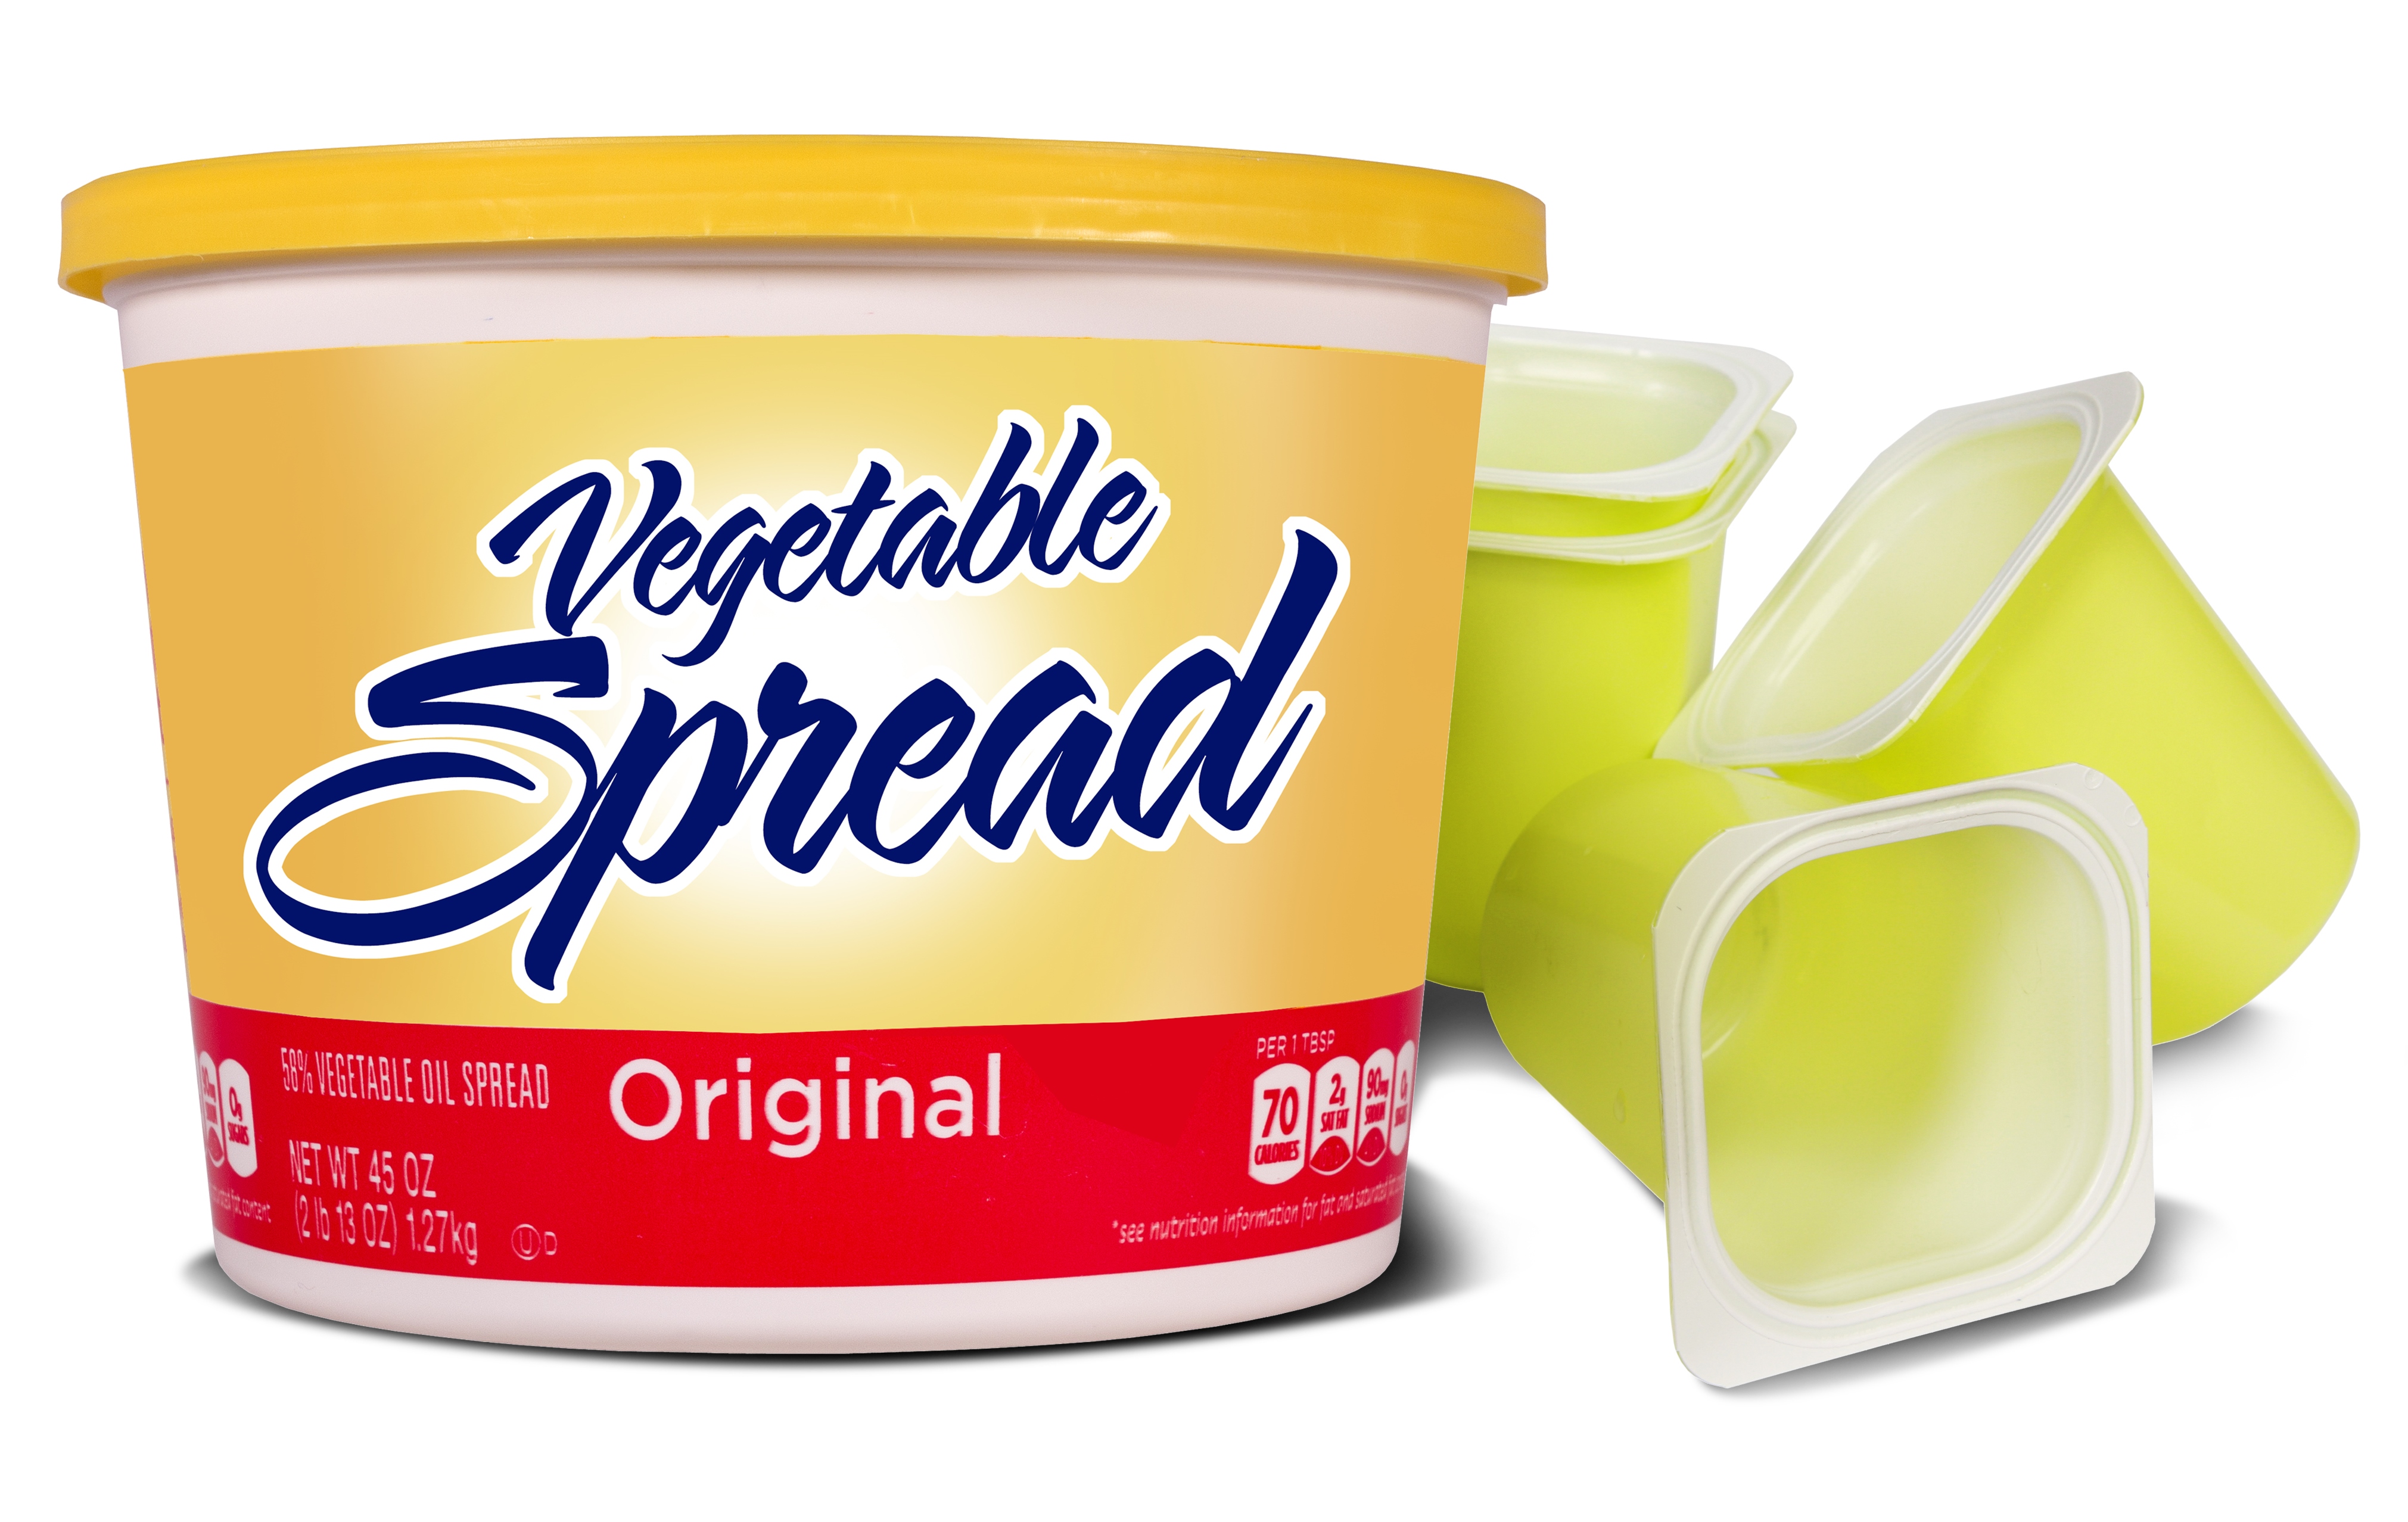 Yogurt and butter tubs that are accepted in the recycling program.